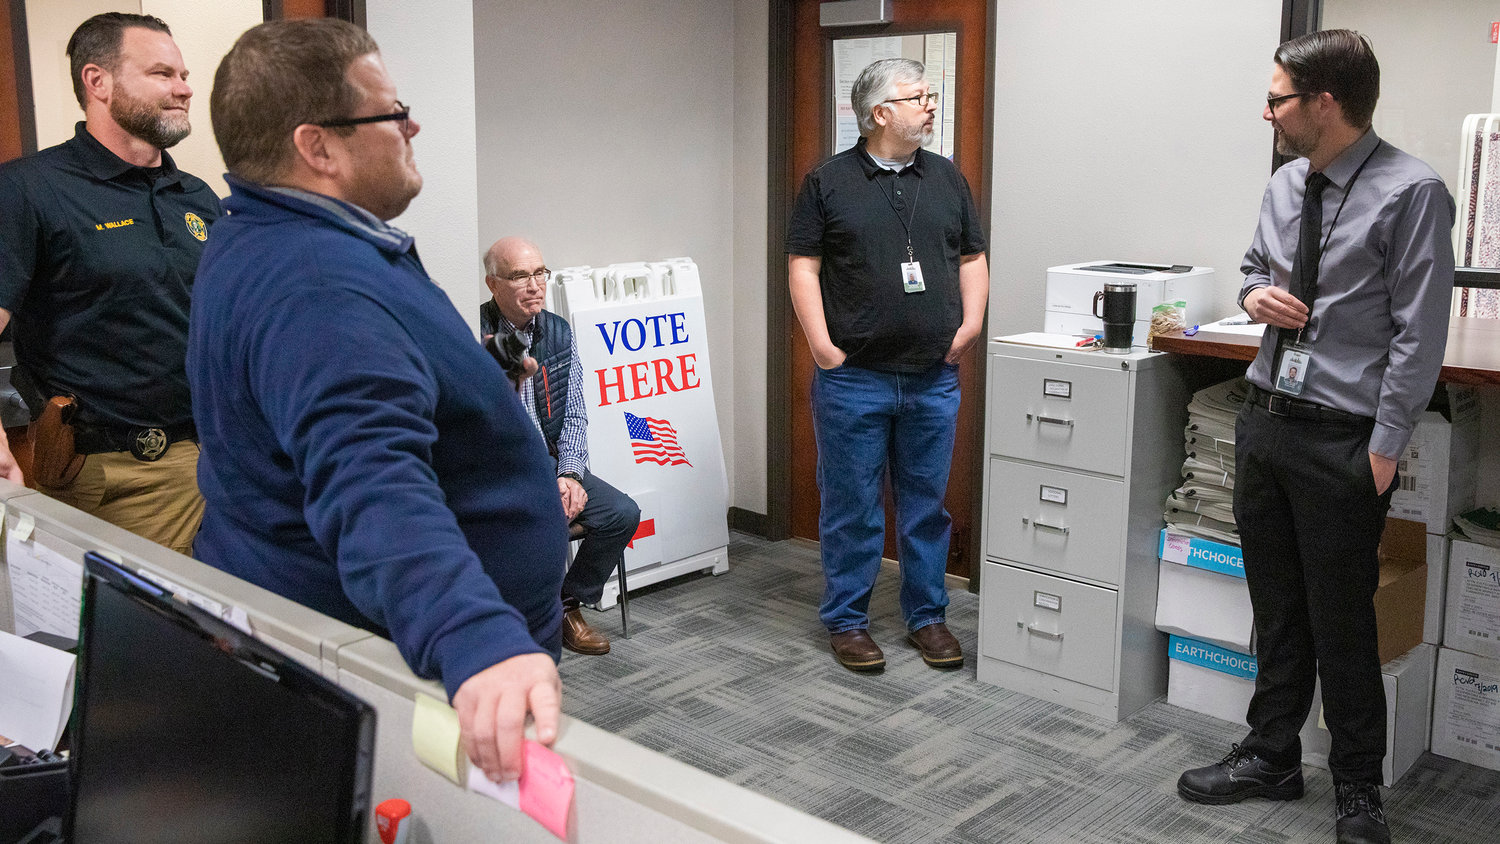 A member of the Lewis County Sheriff’s Office stands guard as Prosecutor Jonathan Meyer, Auditor Larry Grove, Chief Deputy Auditor Tom Stanton and Elections Supervisor Terry Jouper attend a canvasing board meeting Wednesday morning at the Lewis County Courthouse.